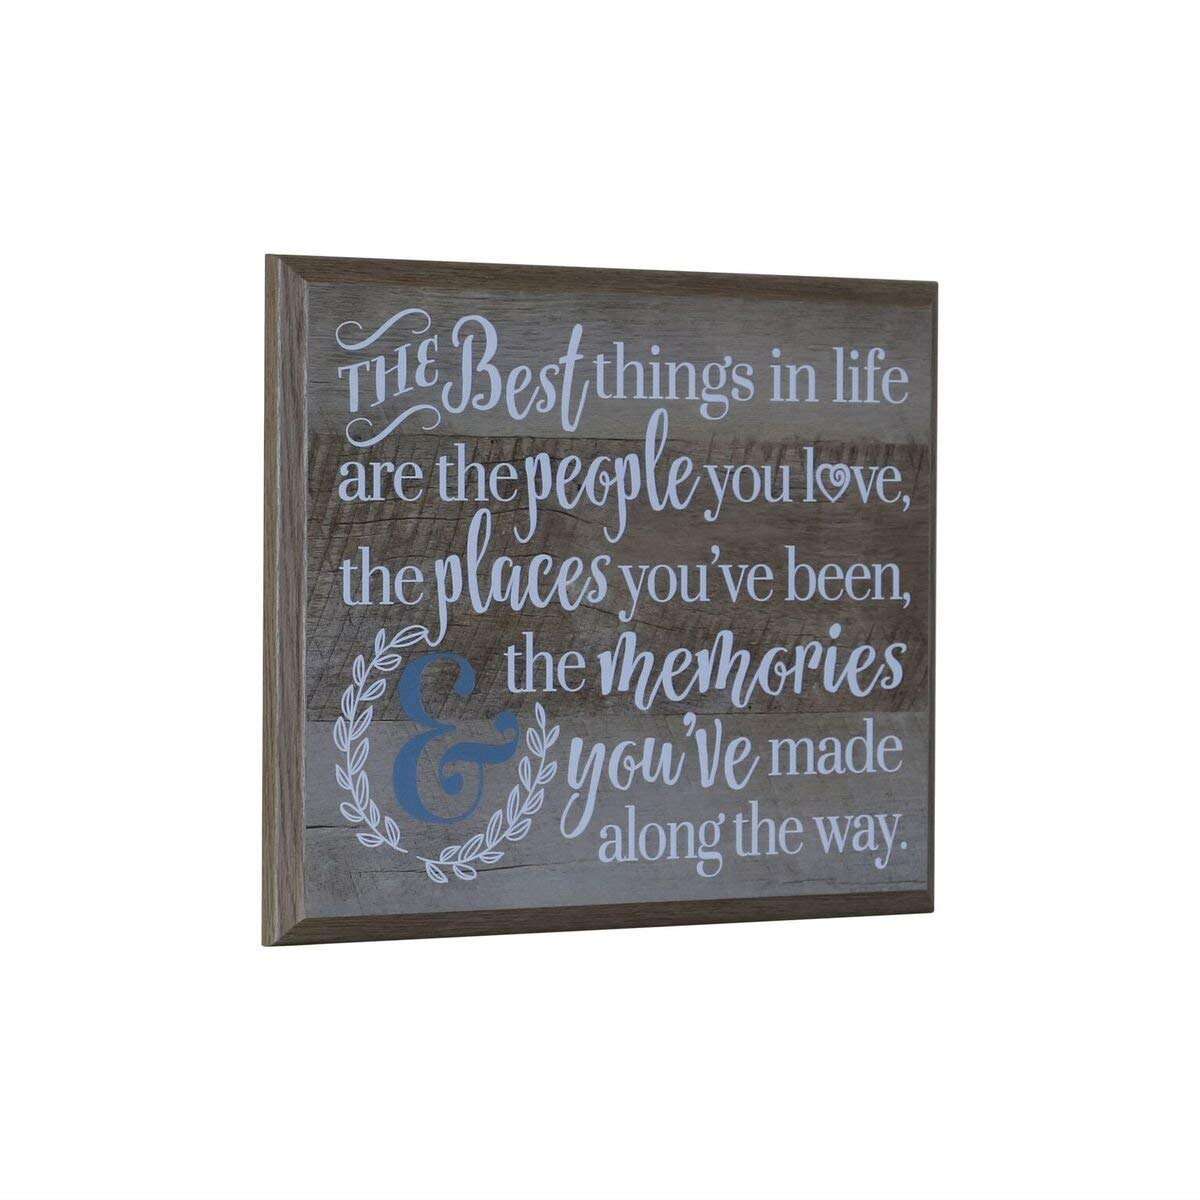 12 x 15 Wall Plaque Decor - The Best Things In Life - LifeSong Milestones